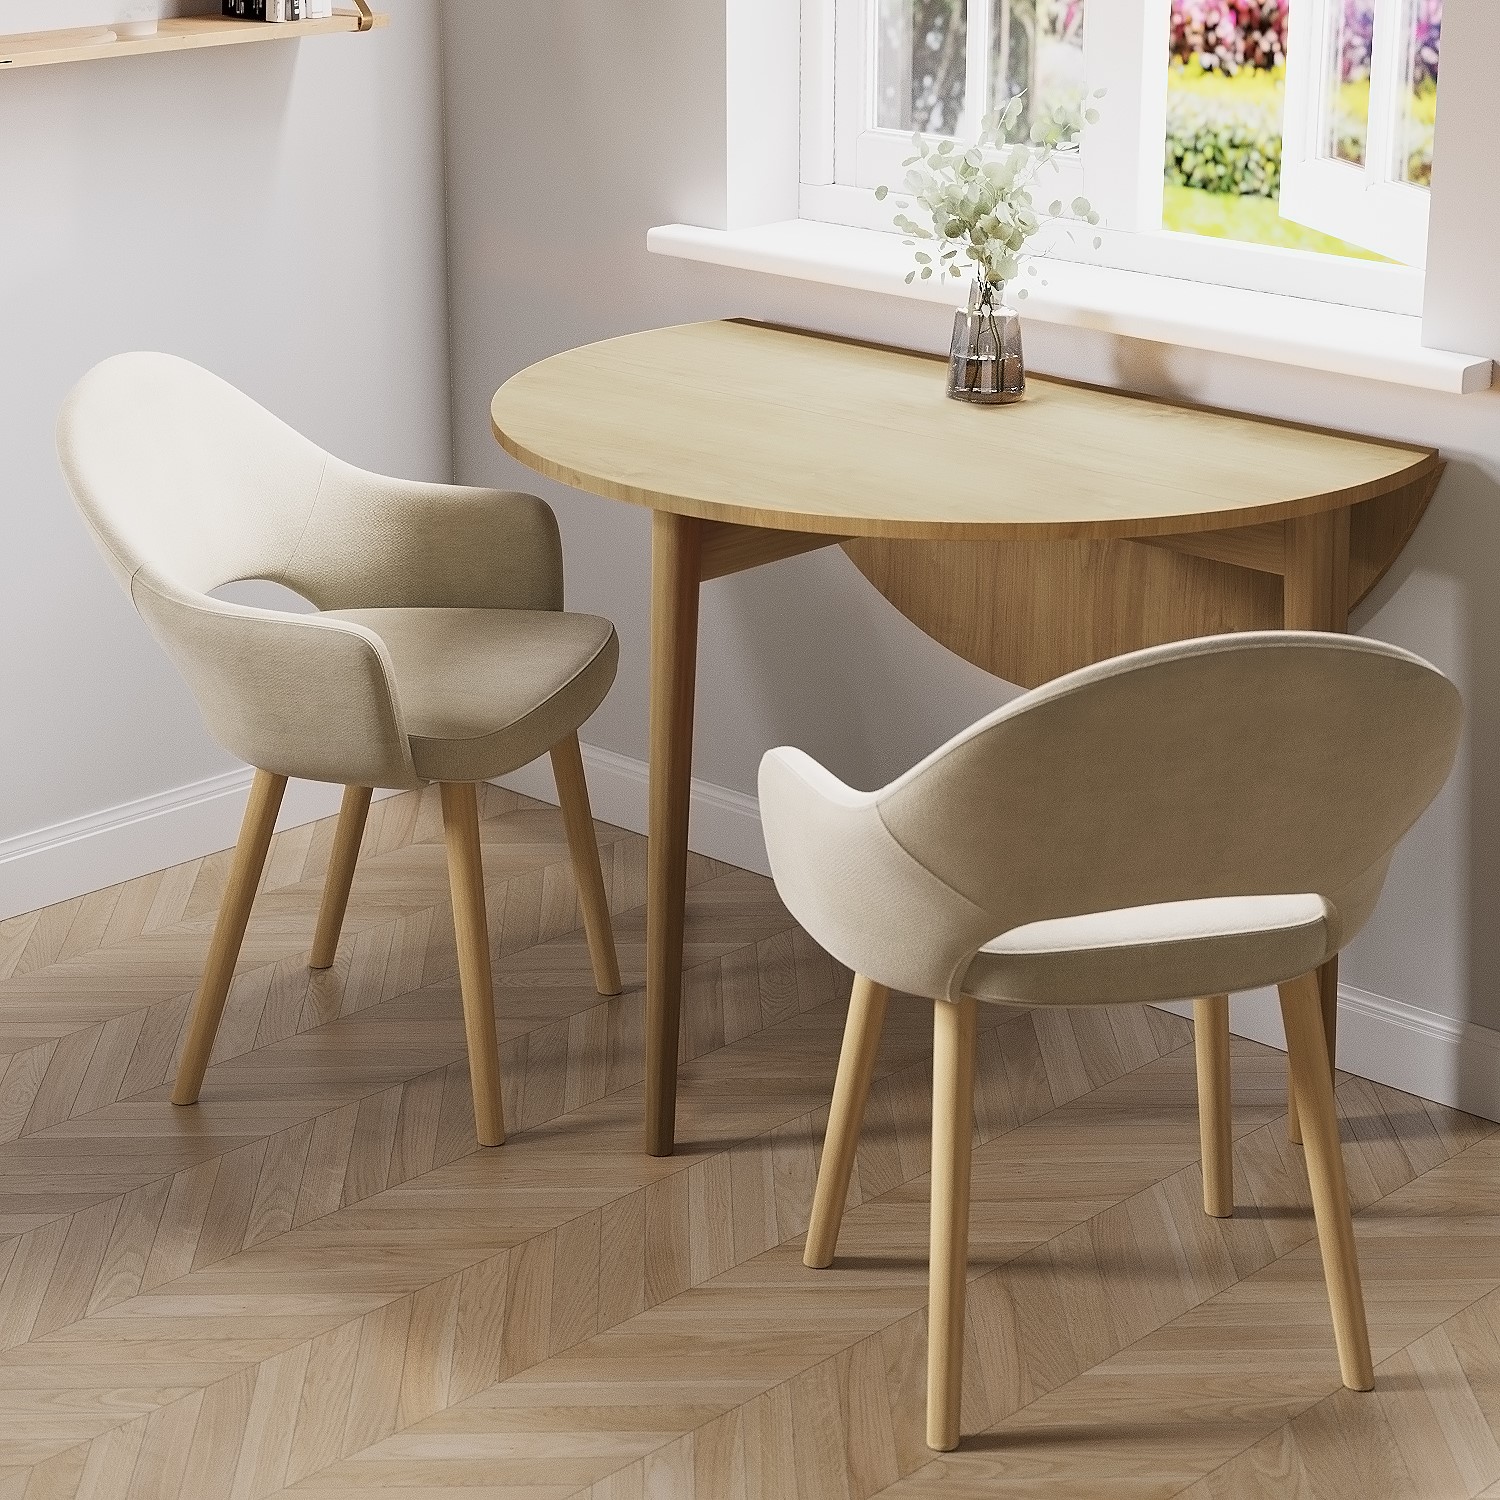 Photo of Round oak drop leaf dining table with 2 beige fabric dining chairs - rudy